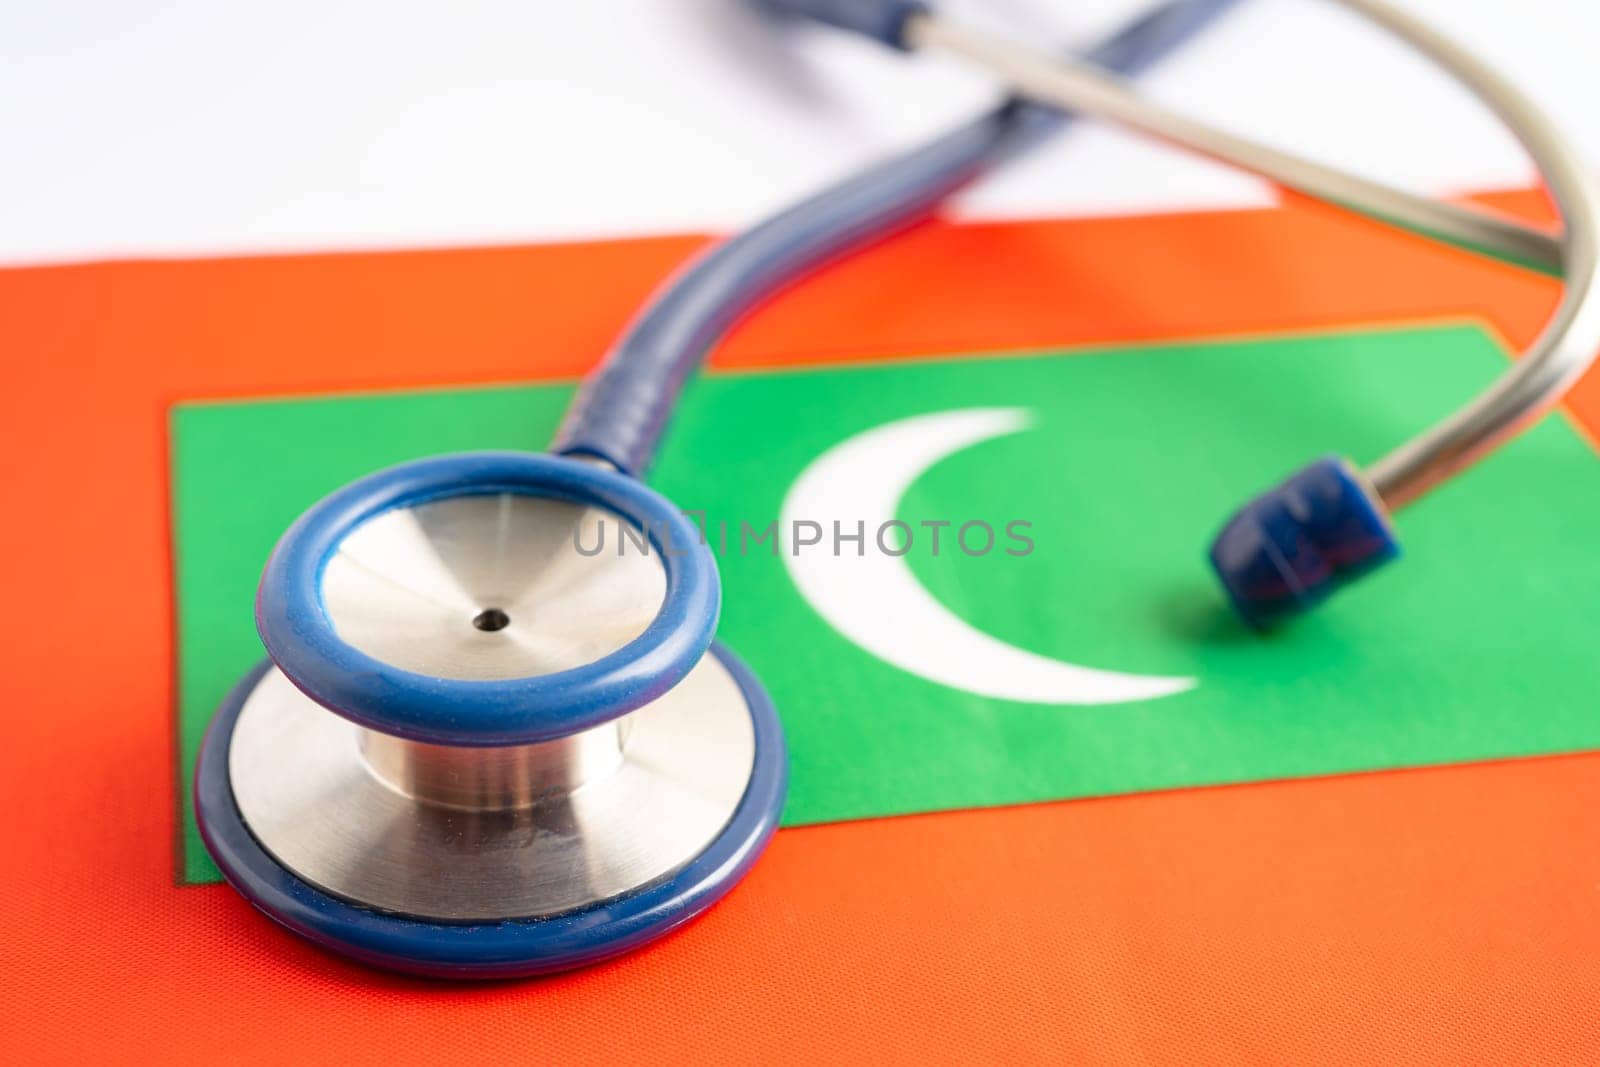 Stethoscope on Maldives flag background, Business and finance concept.